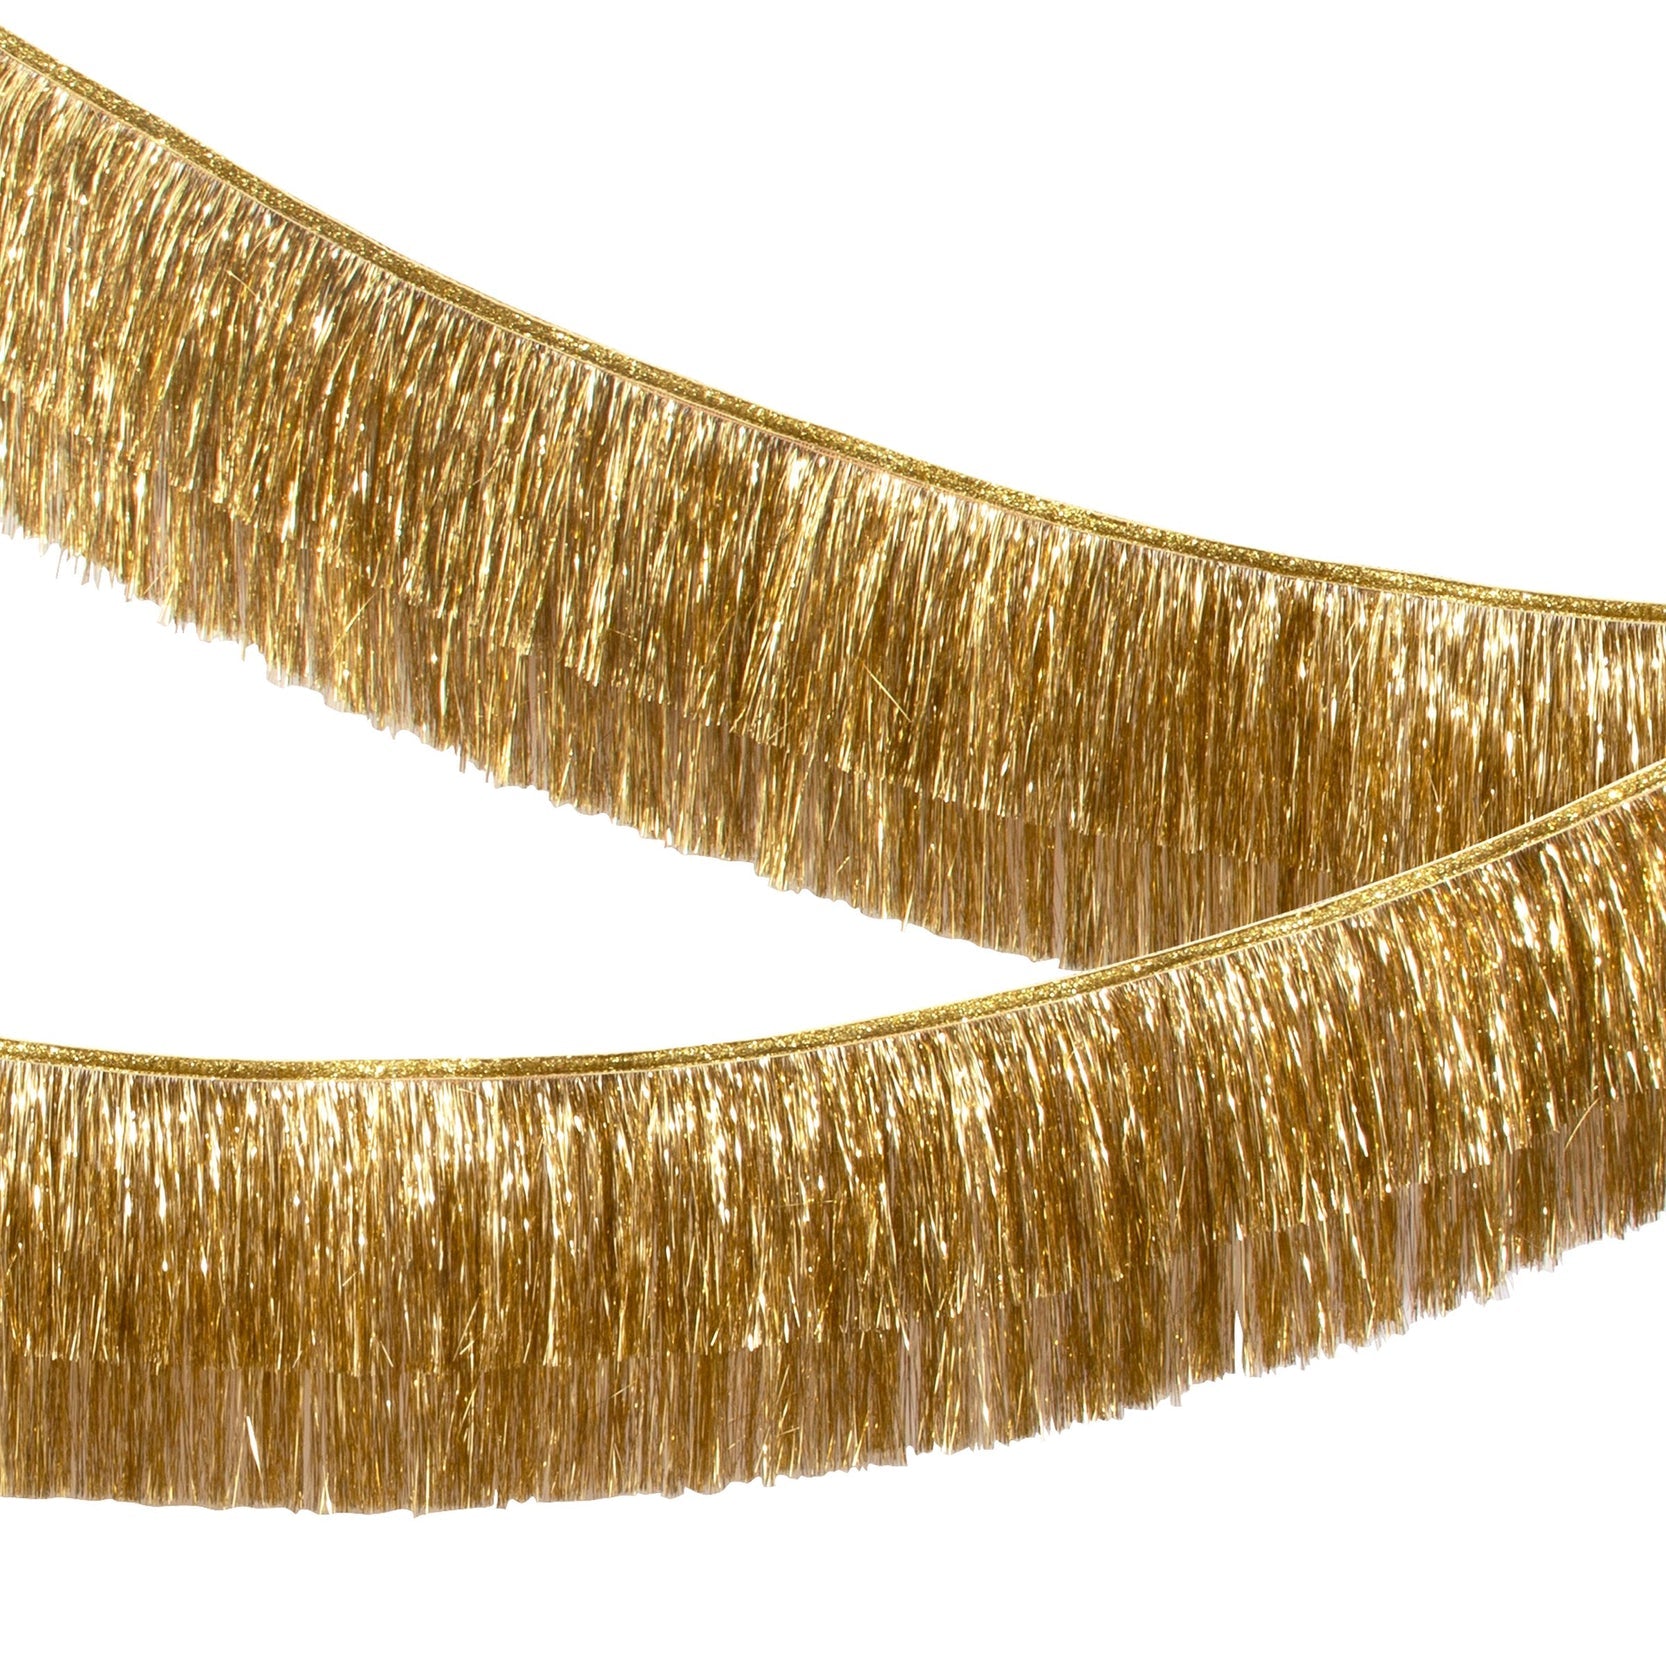 Gold tinsel garland on white background.